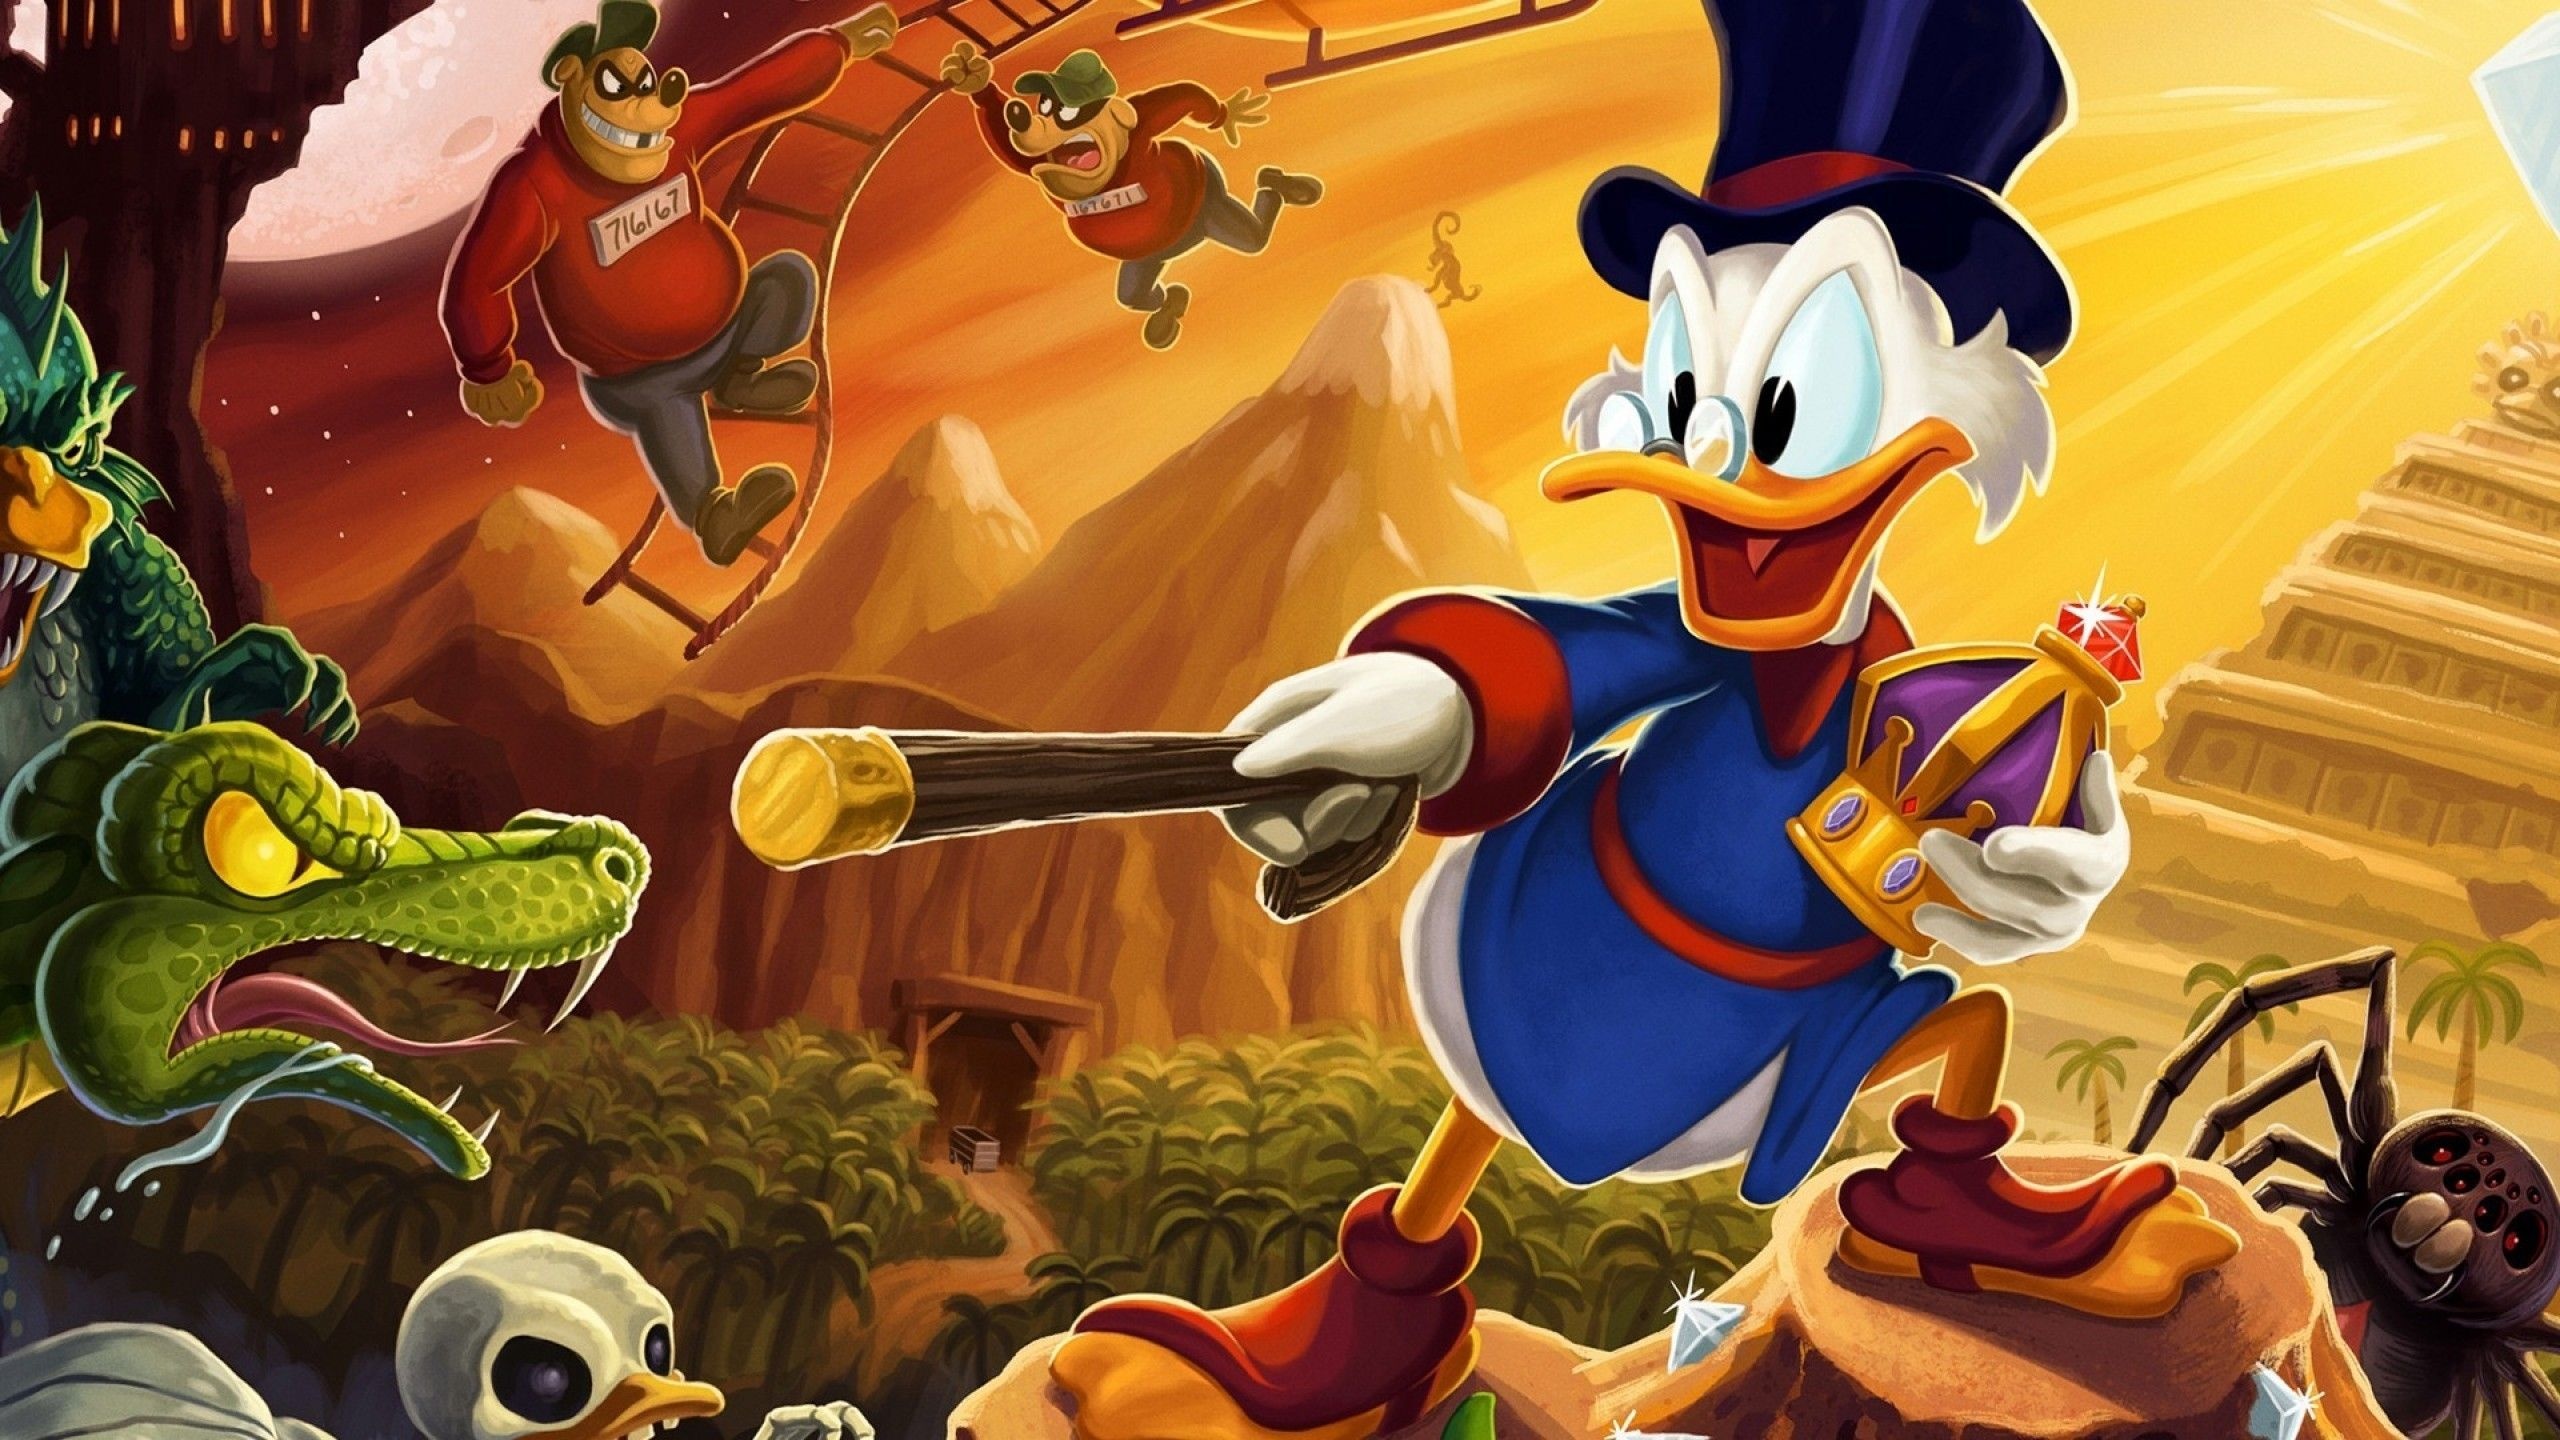 Scrooge McDuck, Animation, Top wallpapers collection, 2560x1440 HD Desktop